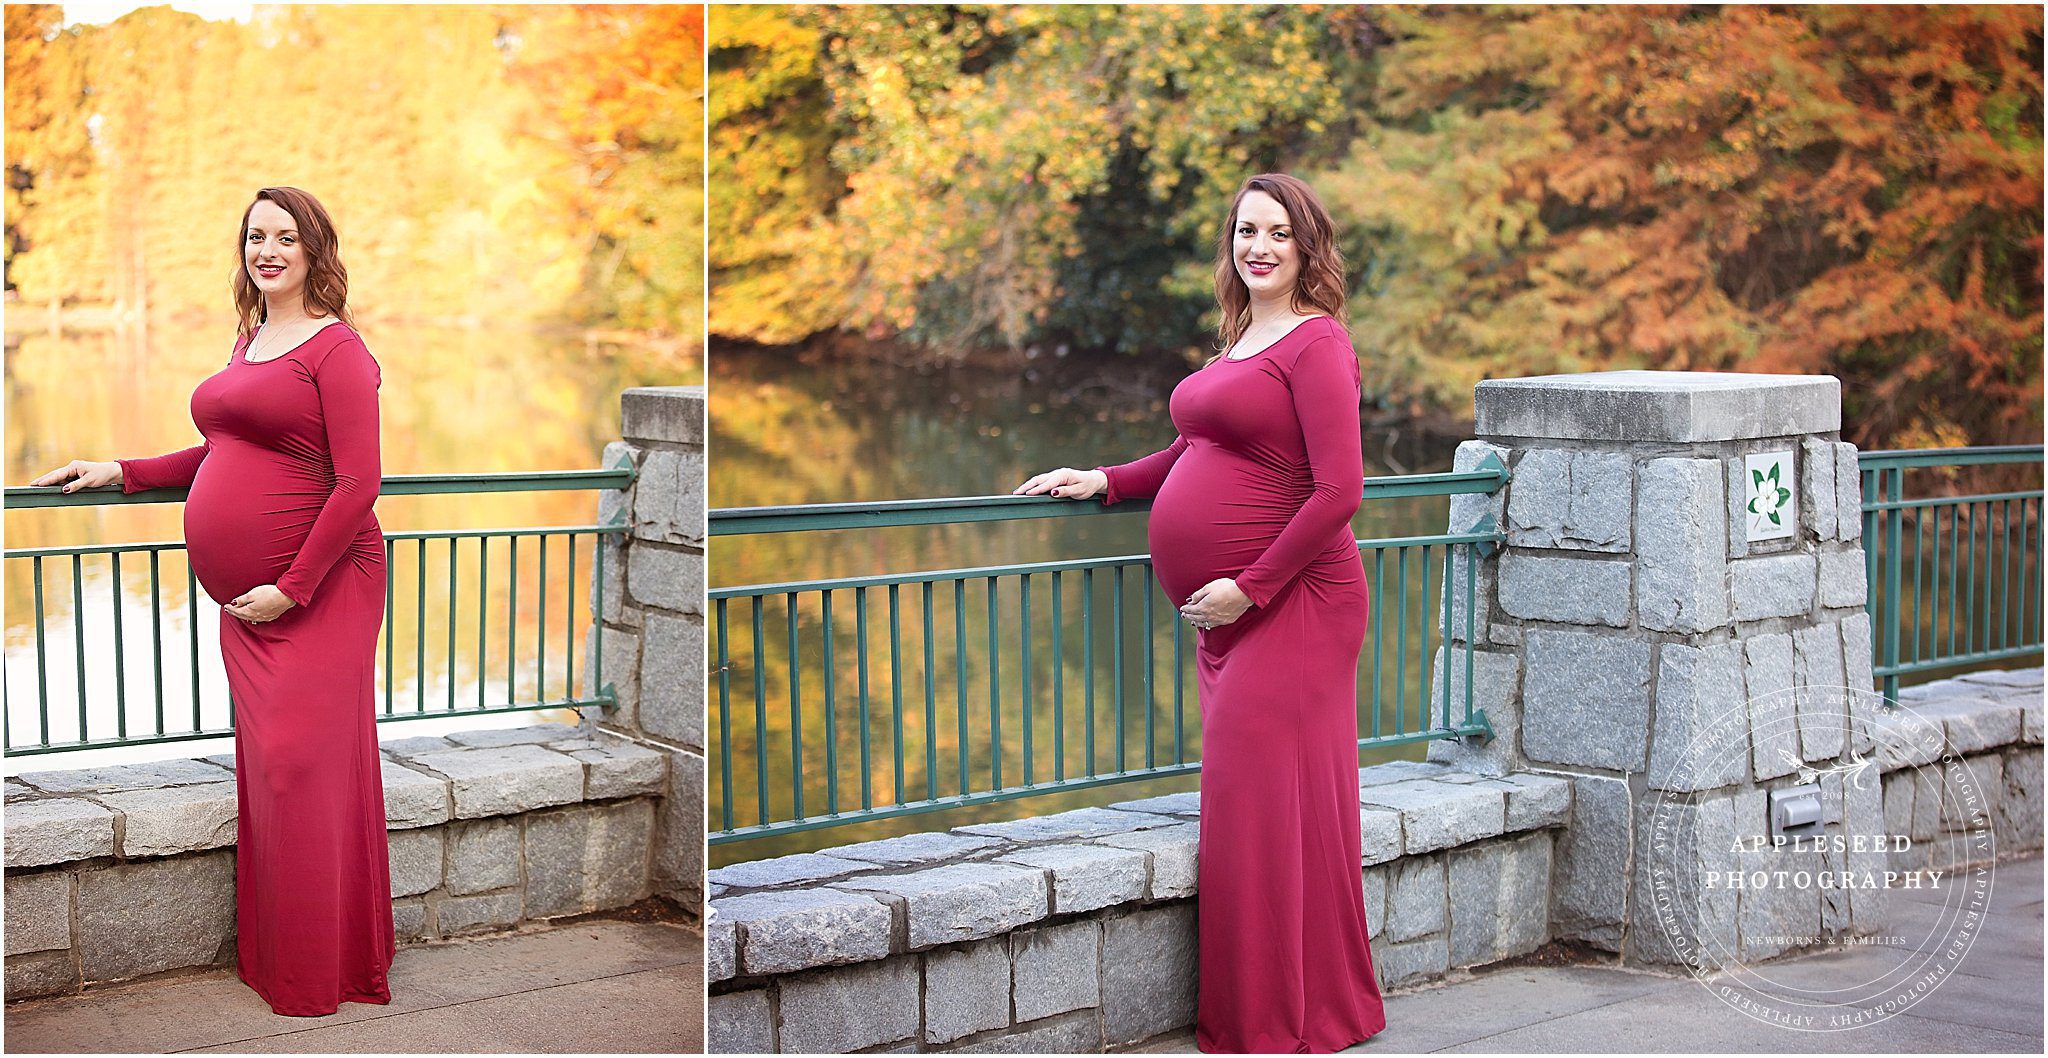 Piedmont Park Maternity Photos | Appleseed Photography